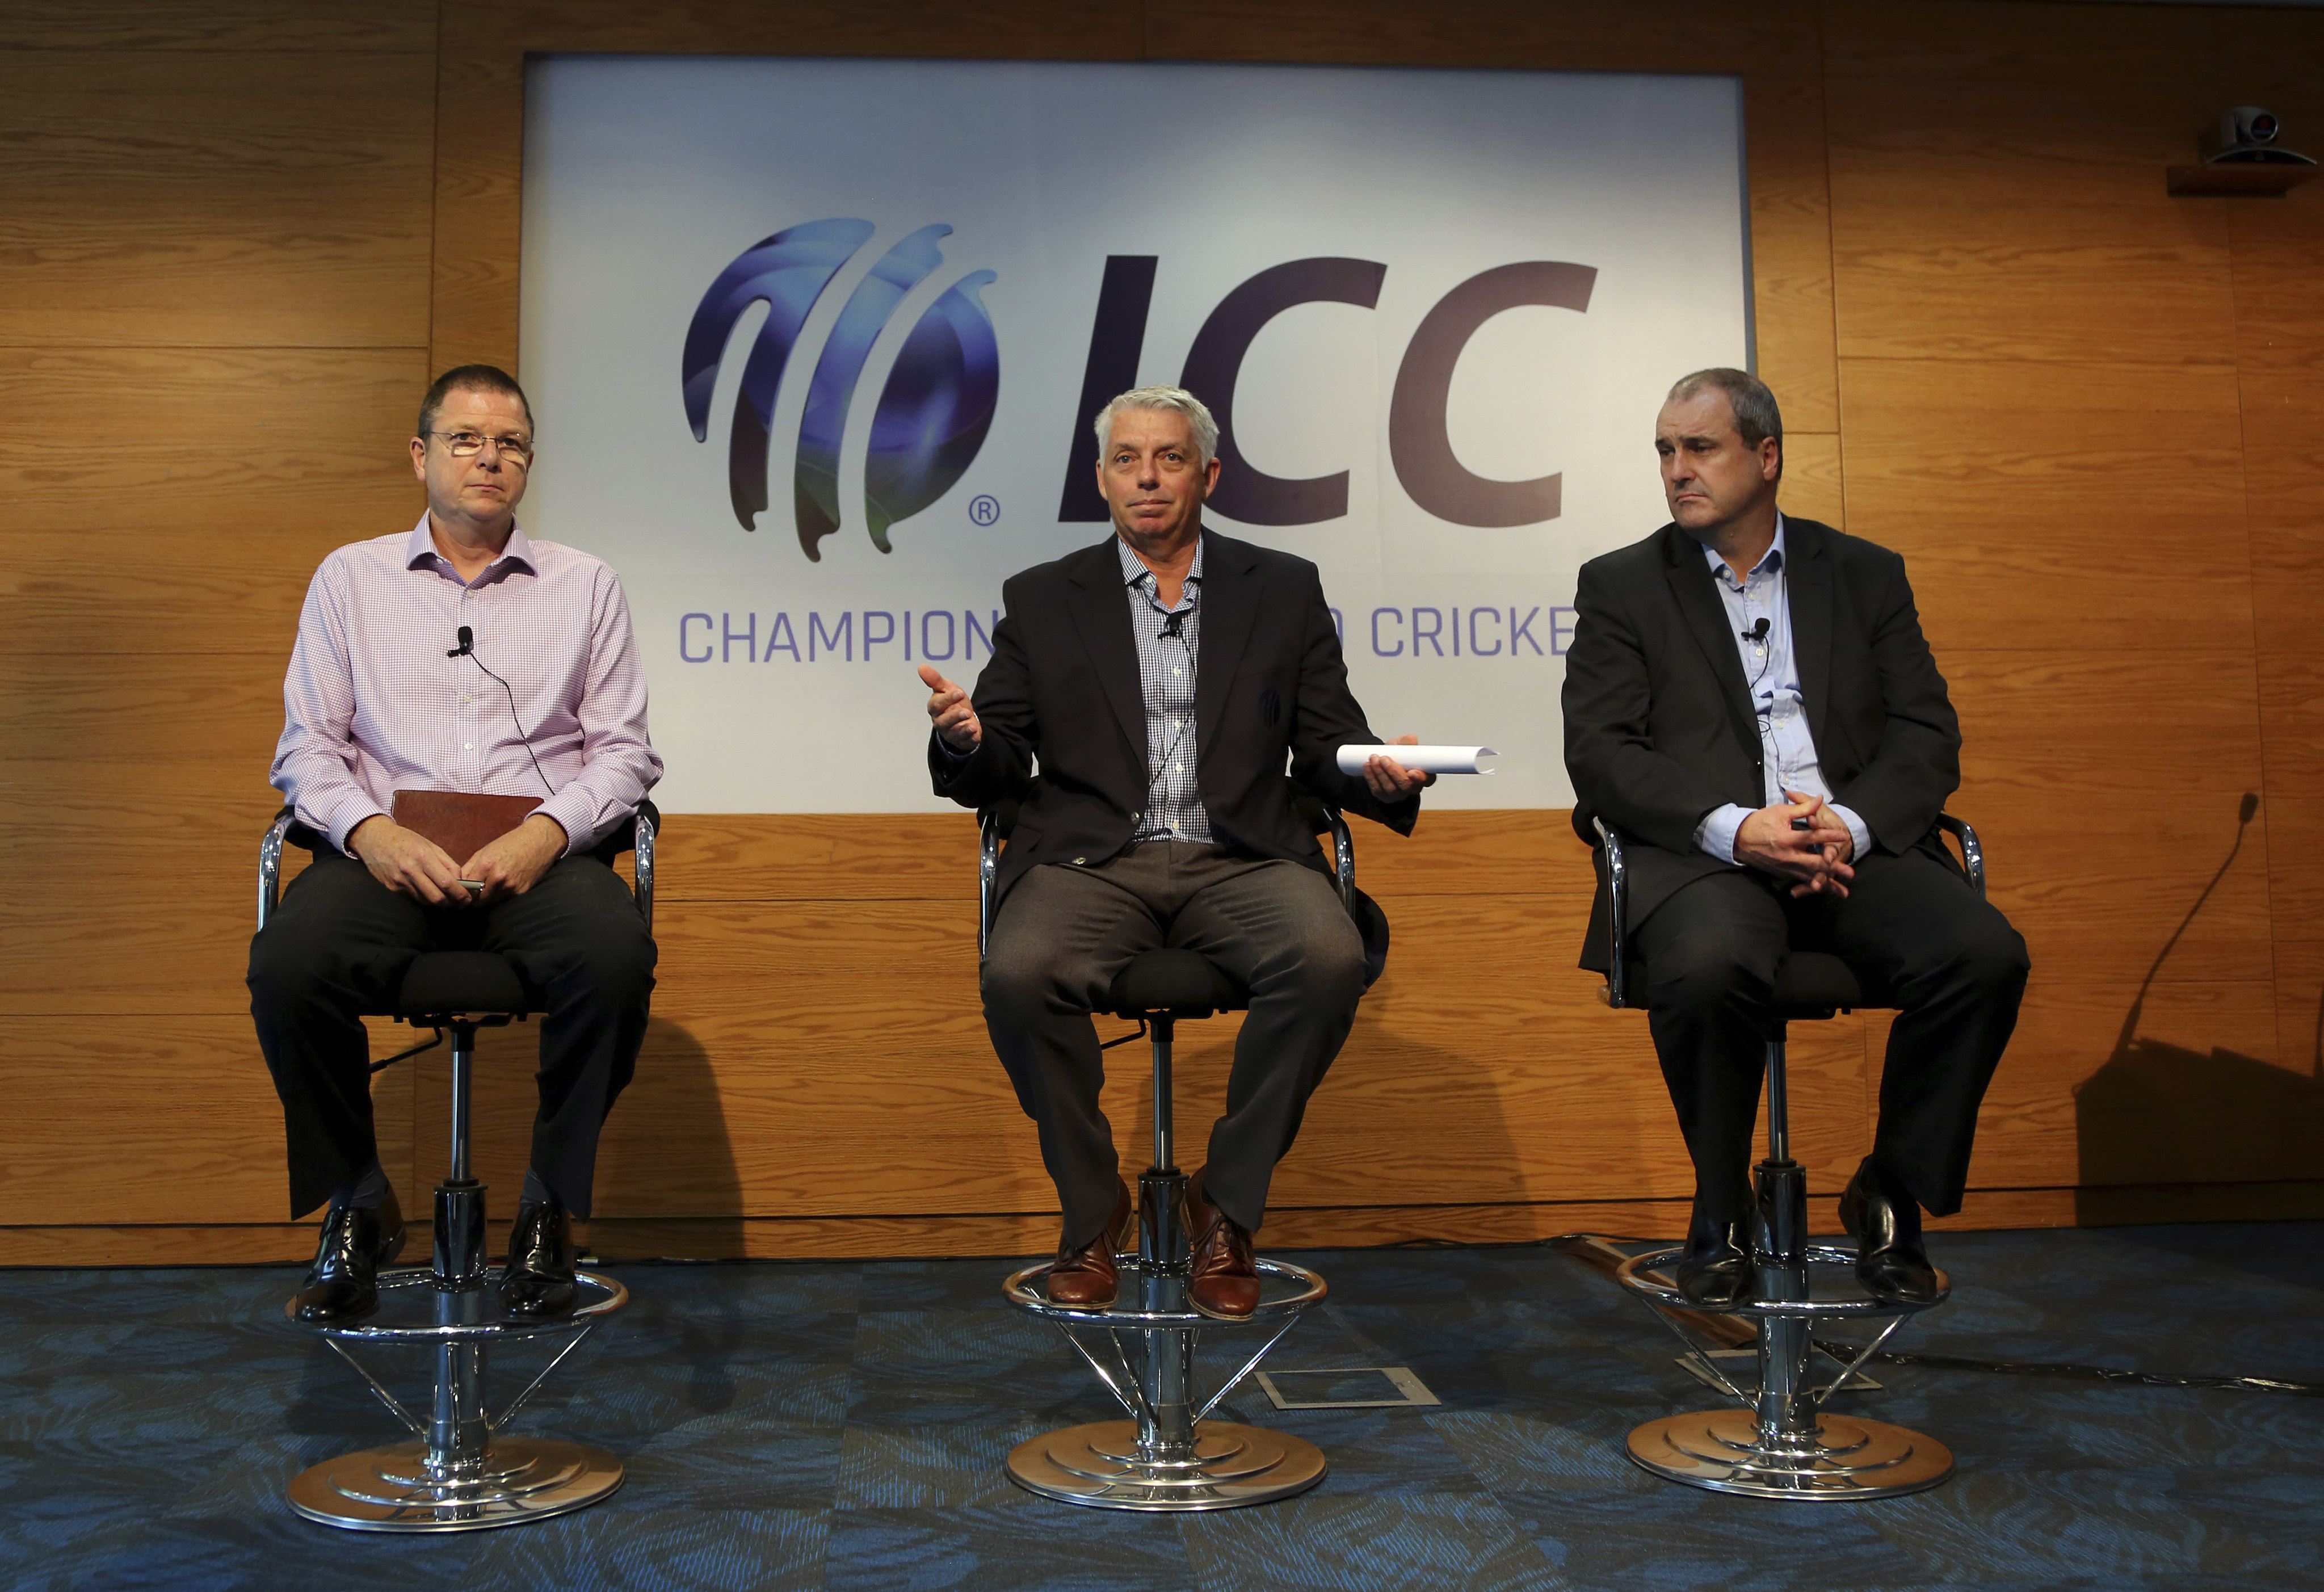 Alex Marshall (left), the general manager of the ICC’s integrity unit, alongside then CEO David Richardson (centre) and Geoff Allardice, the general manager cricket operations, at a press conference at ICC headquarters in Dubai. Photo: AP